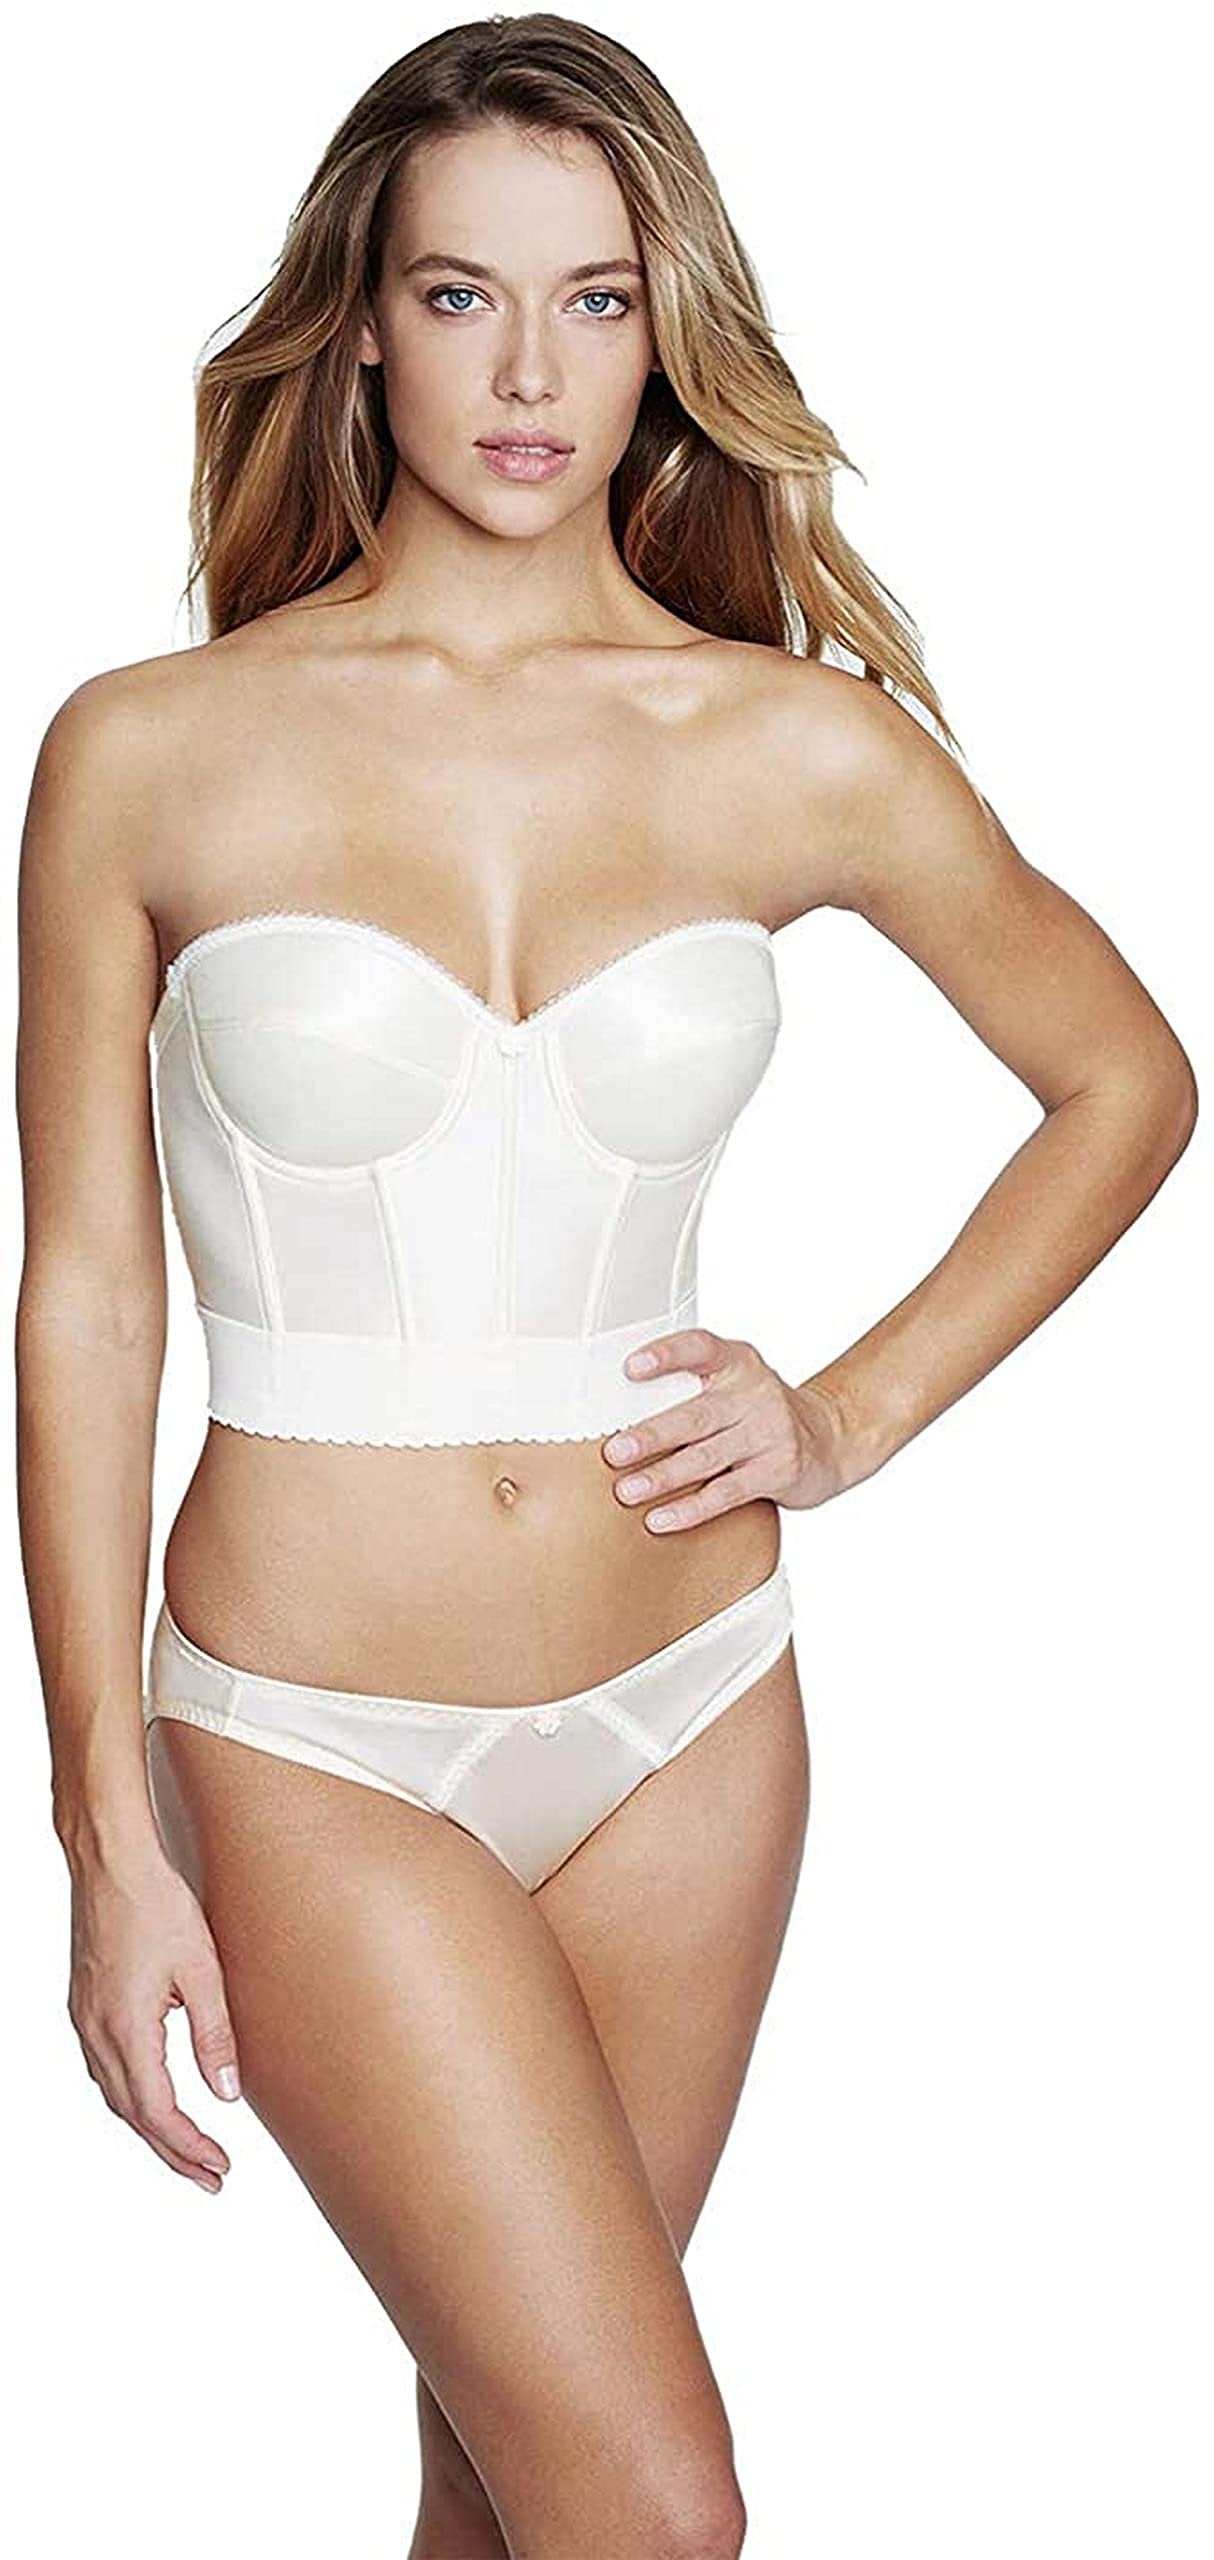 New Dominique Noemi Strapless Backless Bra Ivory 38C - Free Shipping & Returns